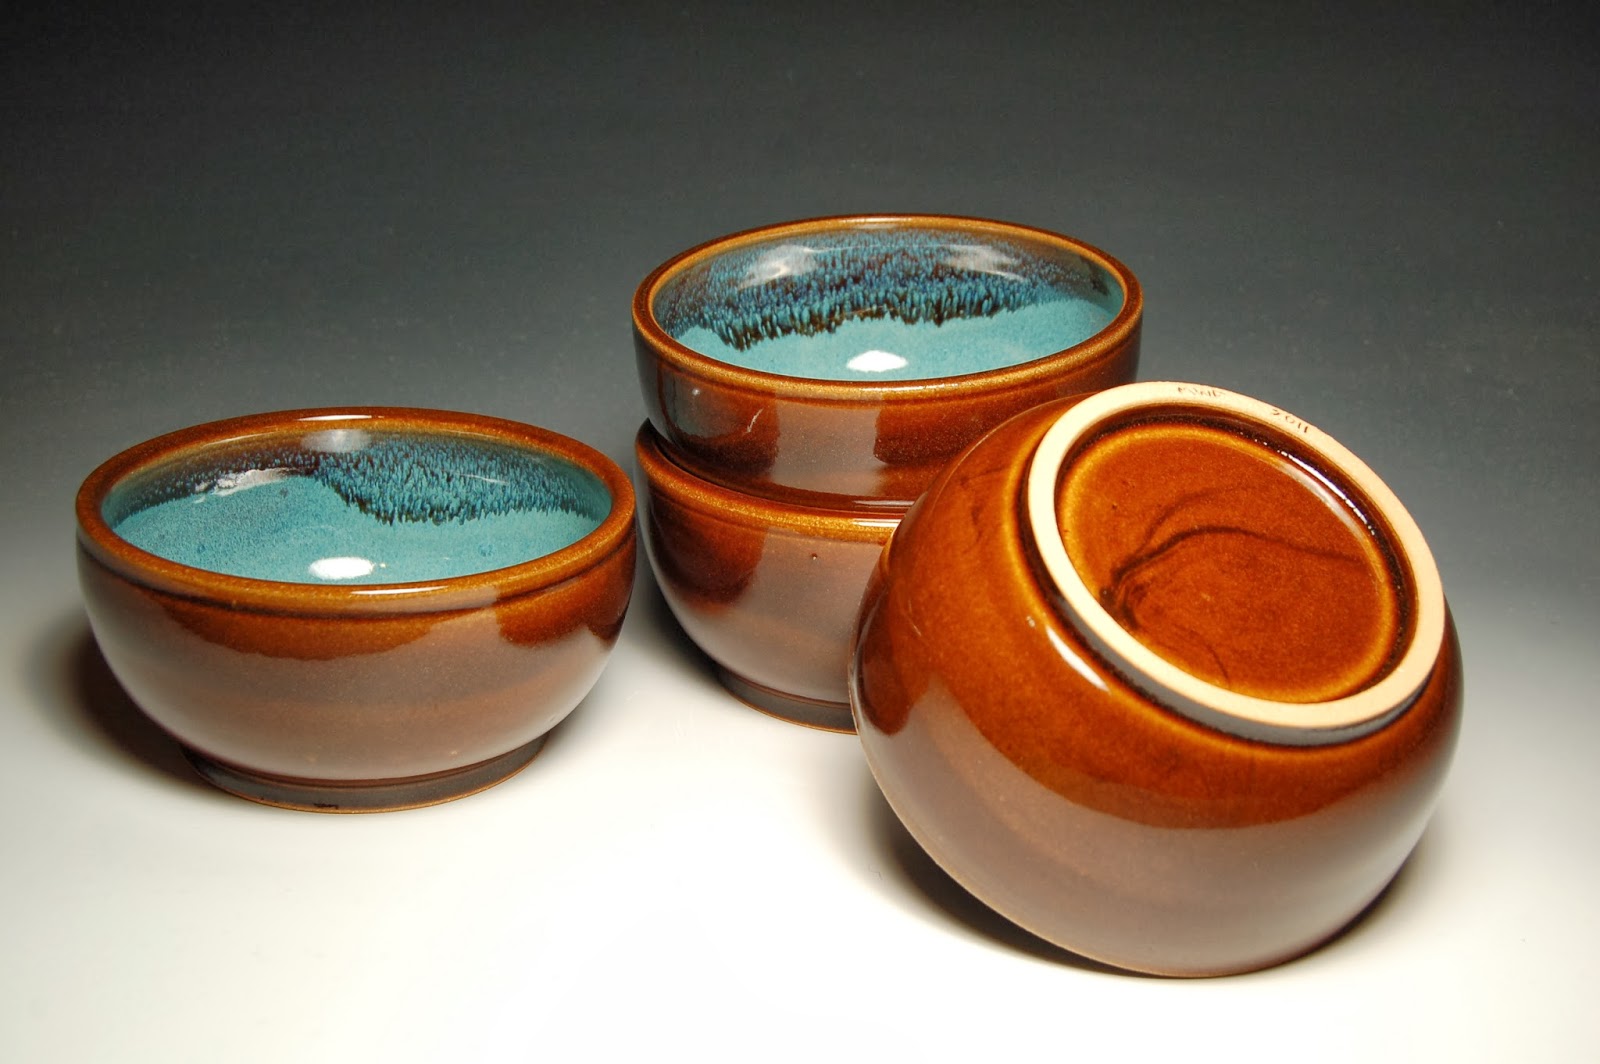 52% Off Pottery Painting - Glazed Bisque-It